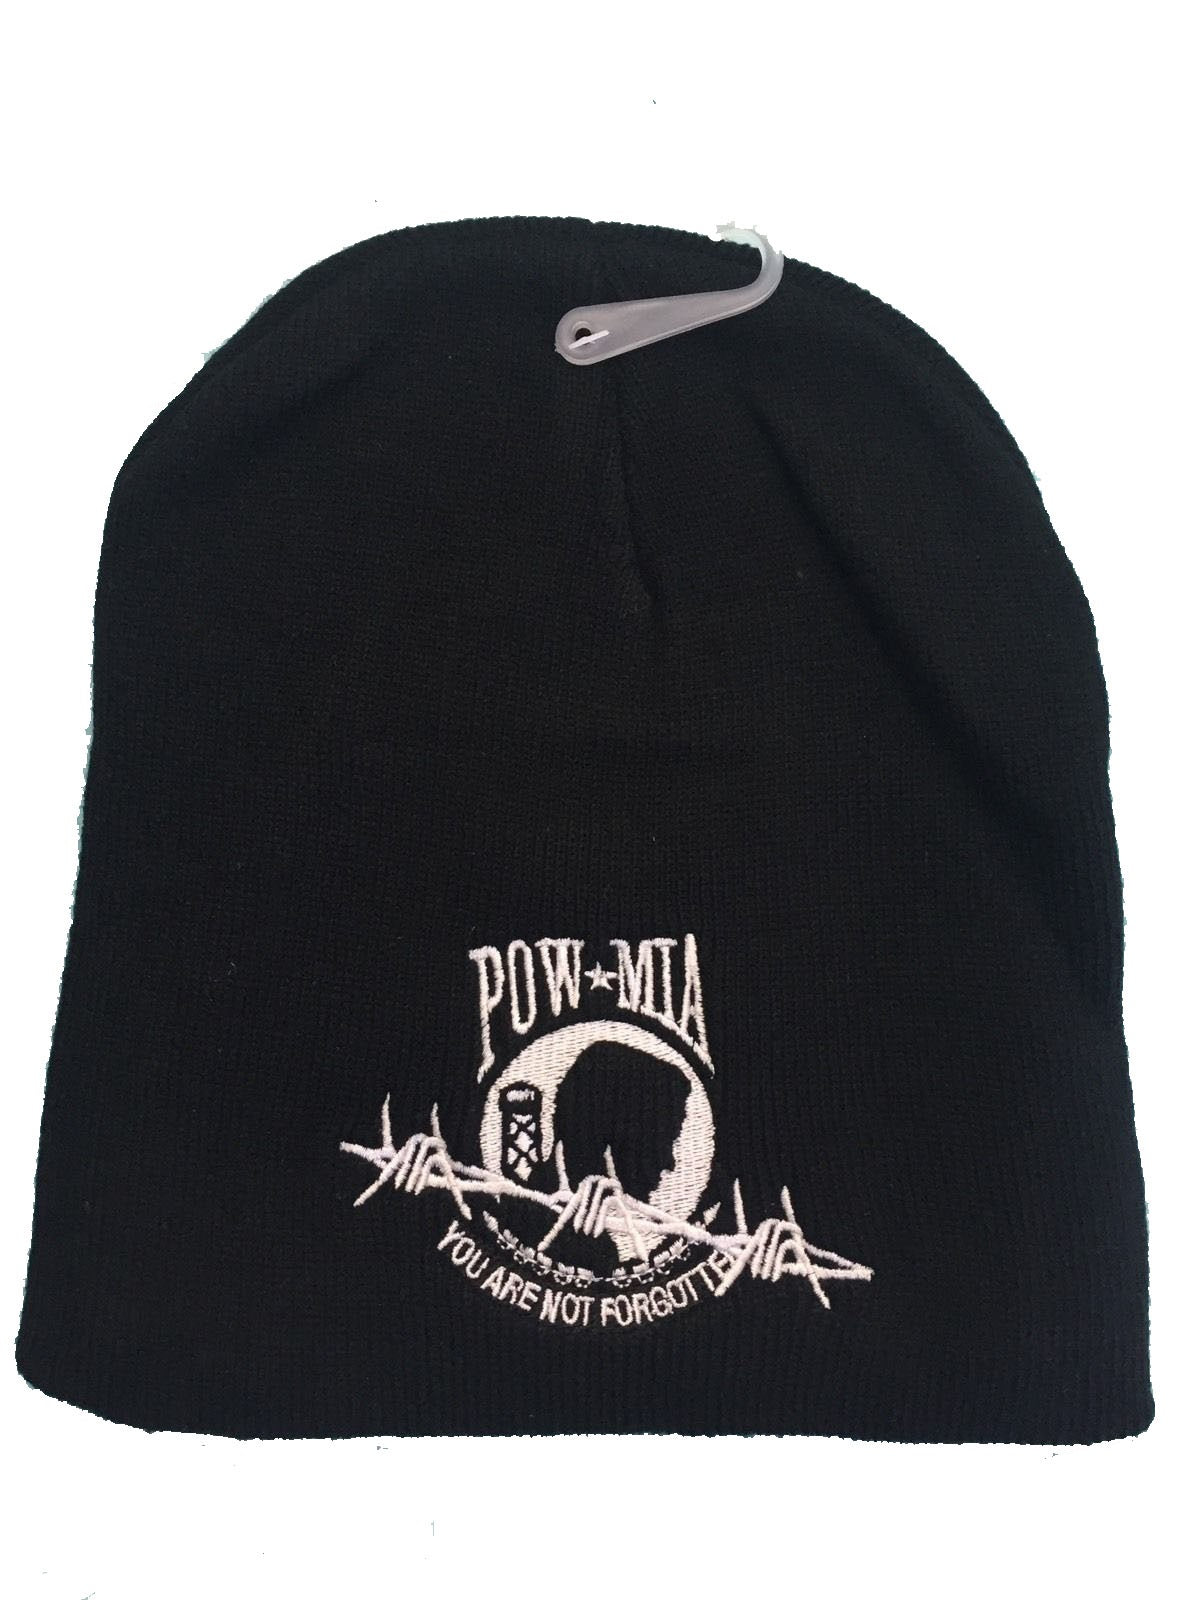 8" POW MIA BARBED WIRE EMBROIDERED WINTER BEANIE SKULL CAP toboggan hat